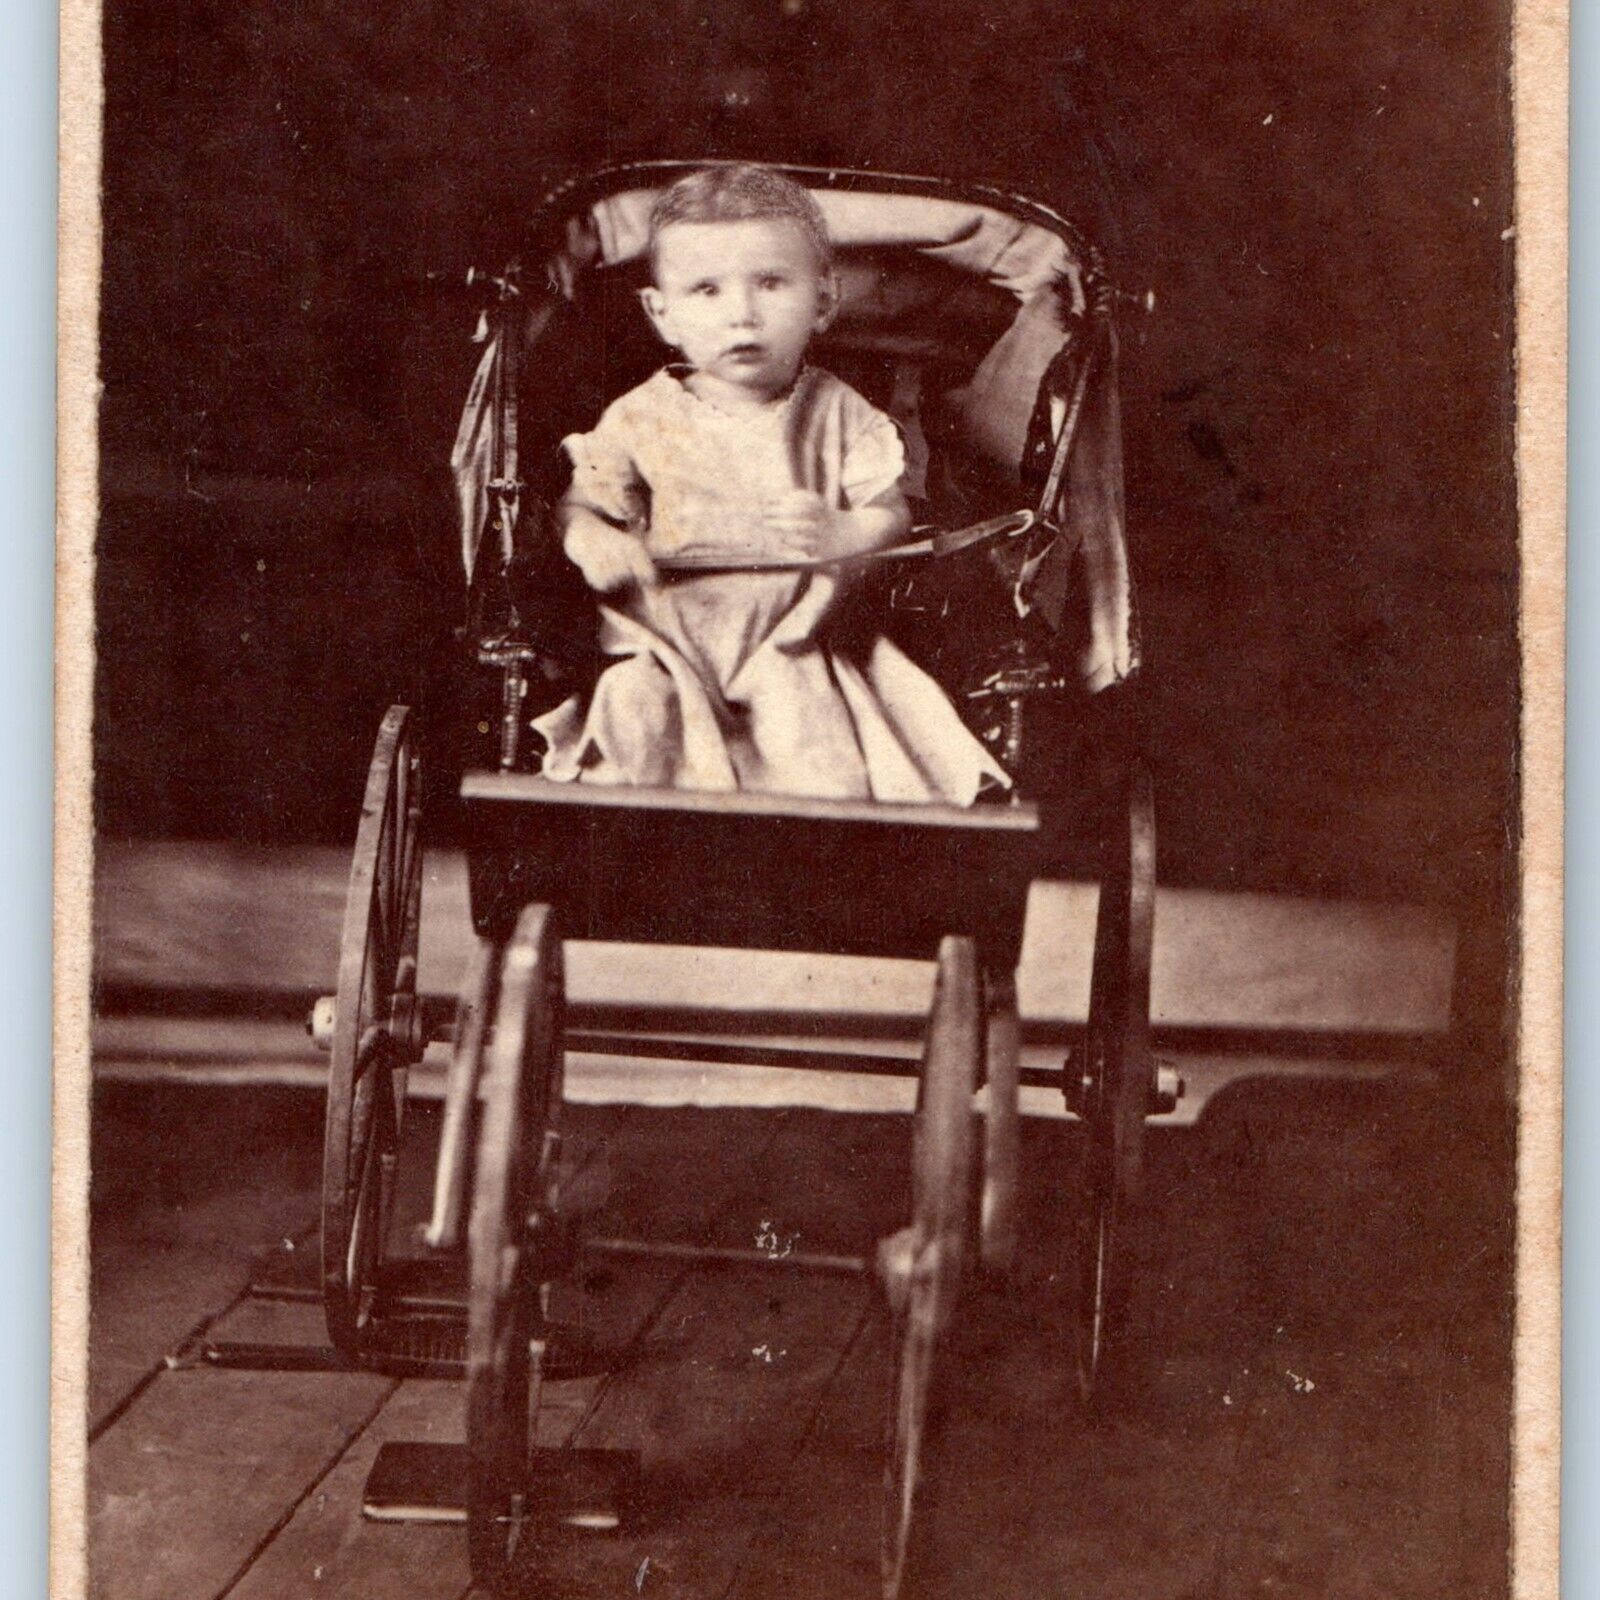 c1870s Adorable Baby Boy in Large Antique Stroller CdV Photo Card Cute Child H27